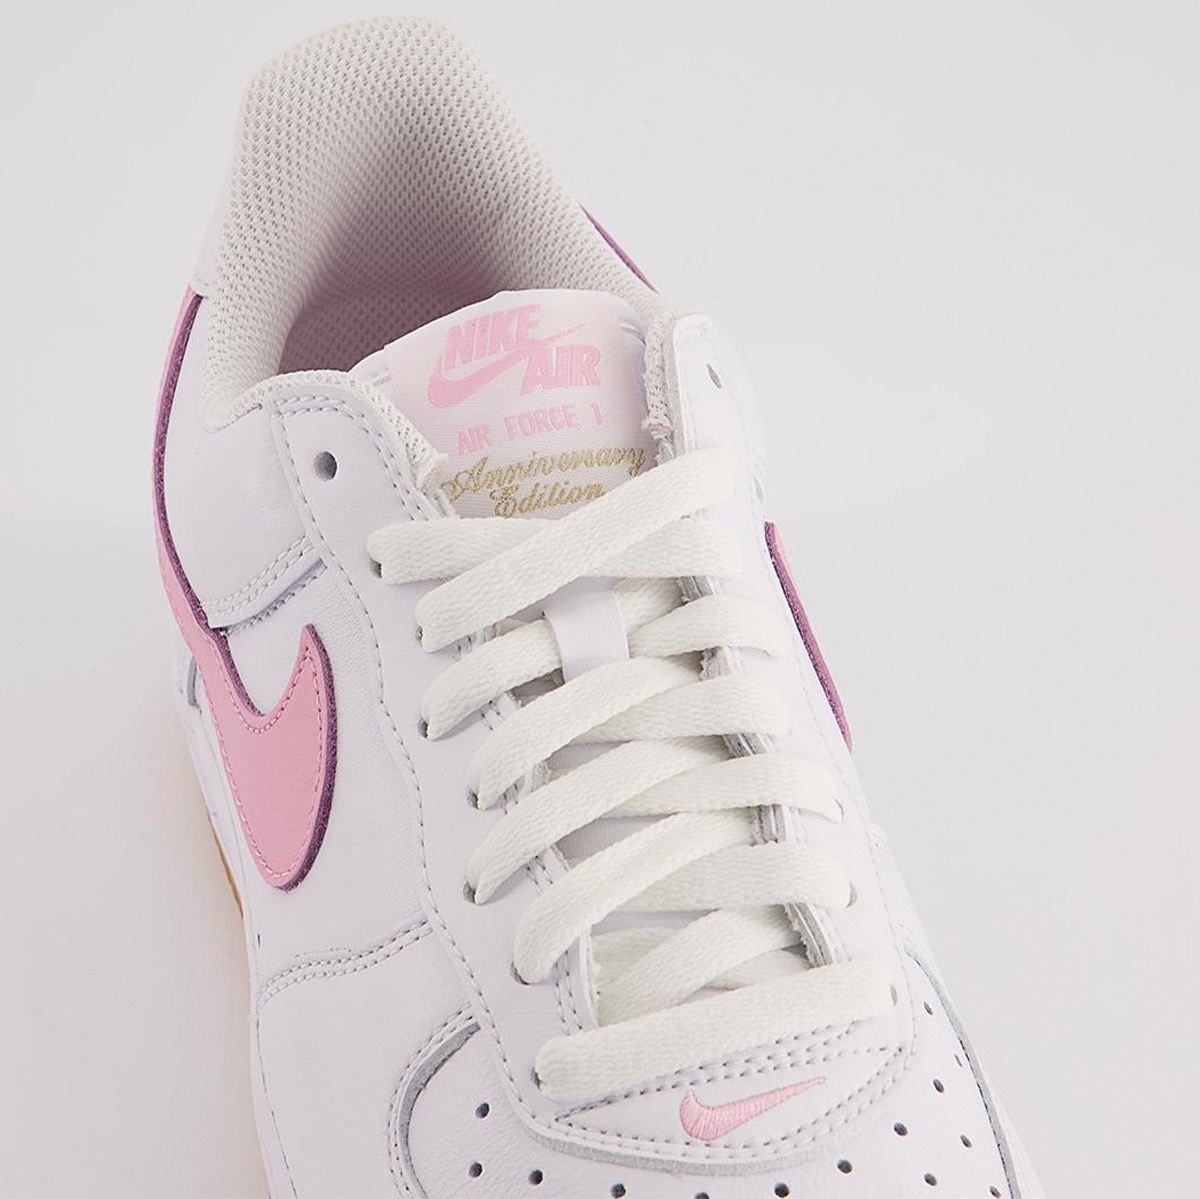 Nike Air Force 1 Low Since 82 White Pink Gum DM0576-101 Release Date